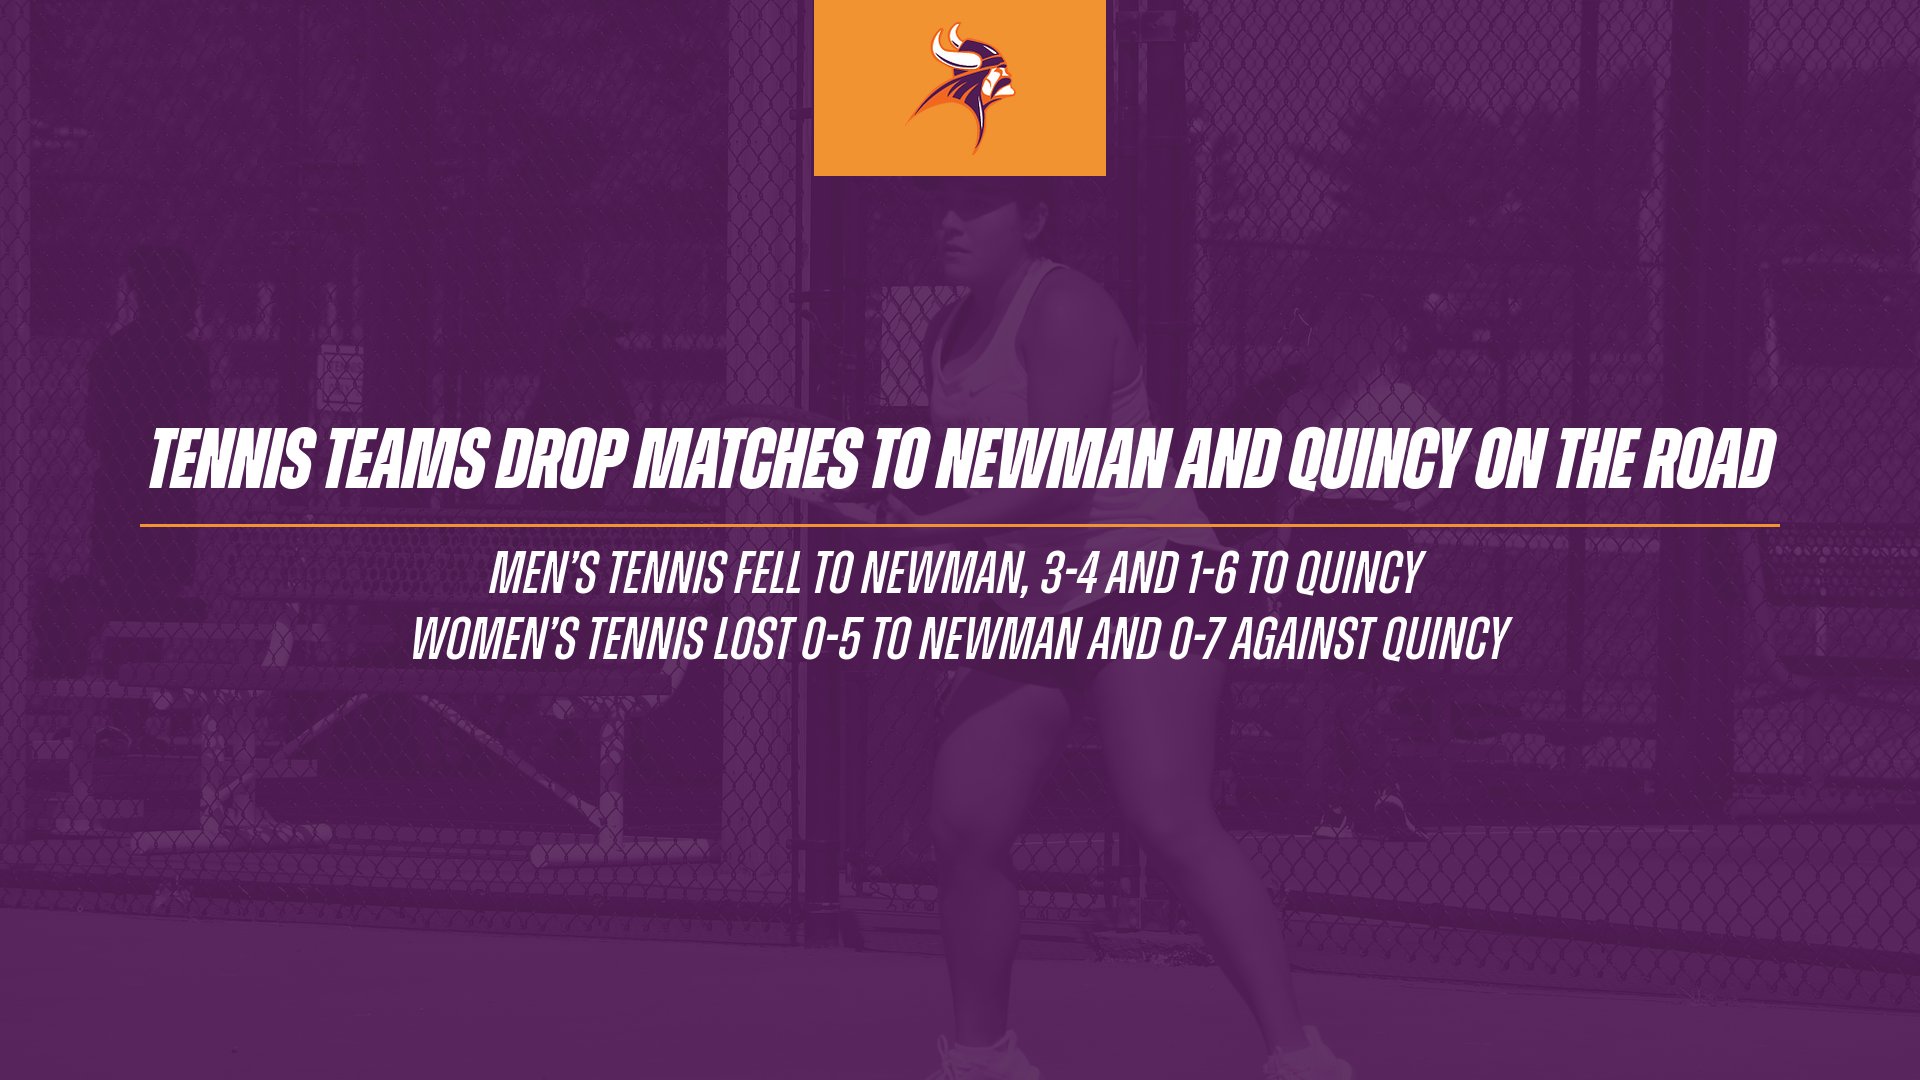 Tennis Teams Drop Matches to Newman and Quincy on the Road